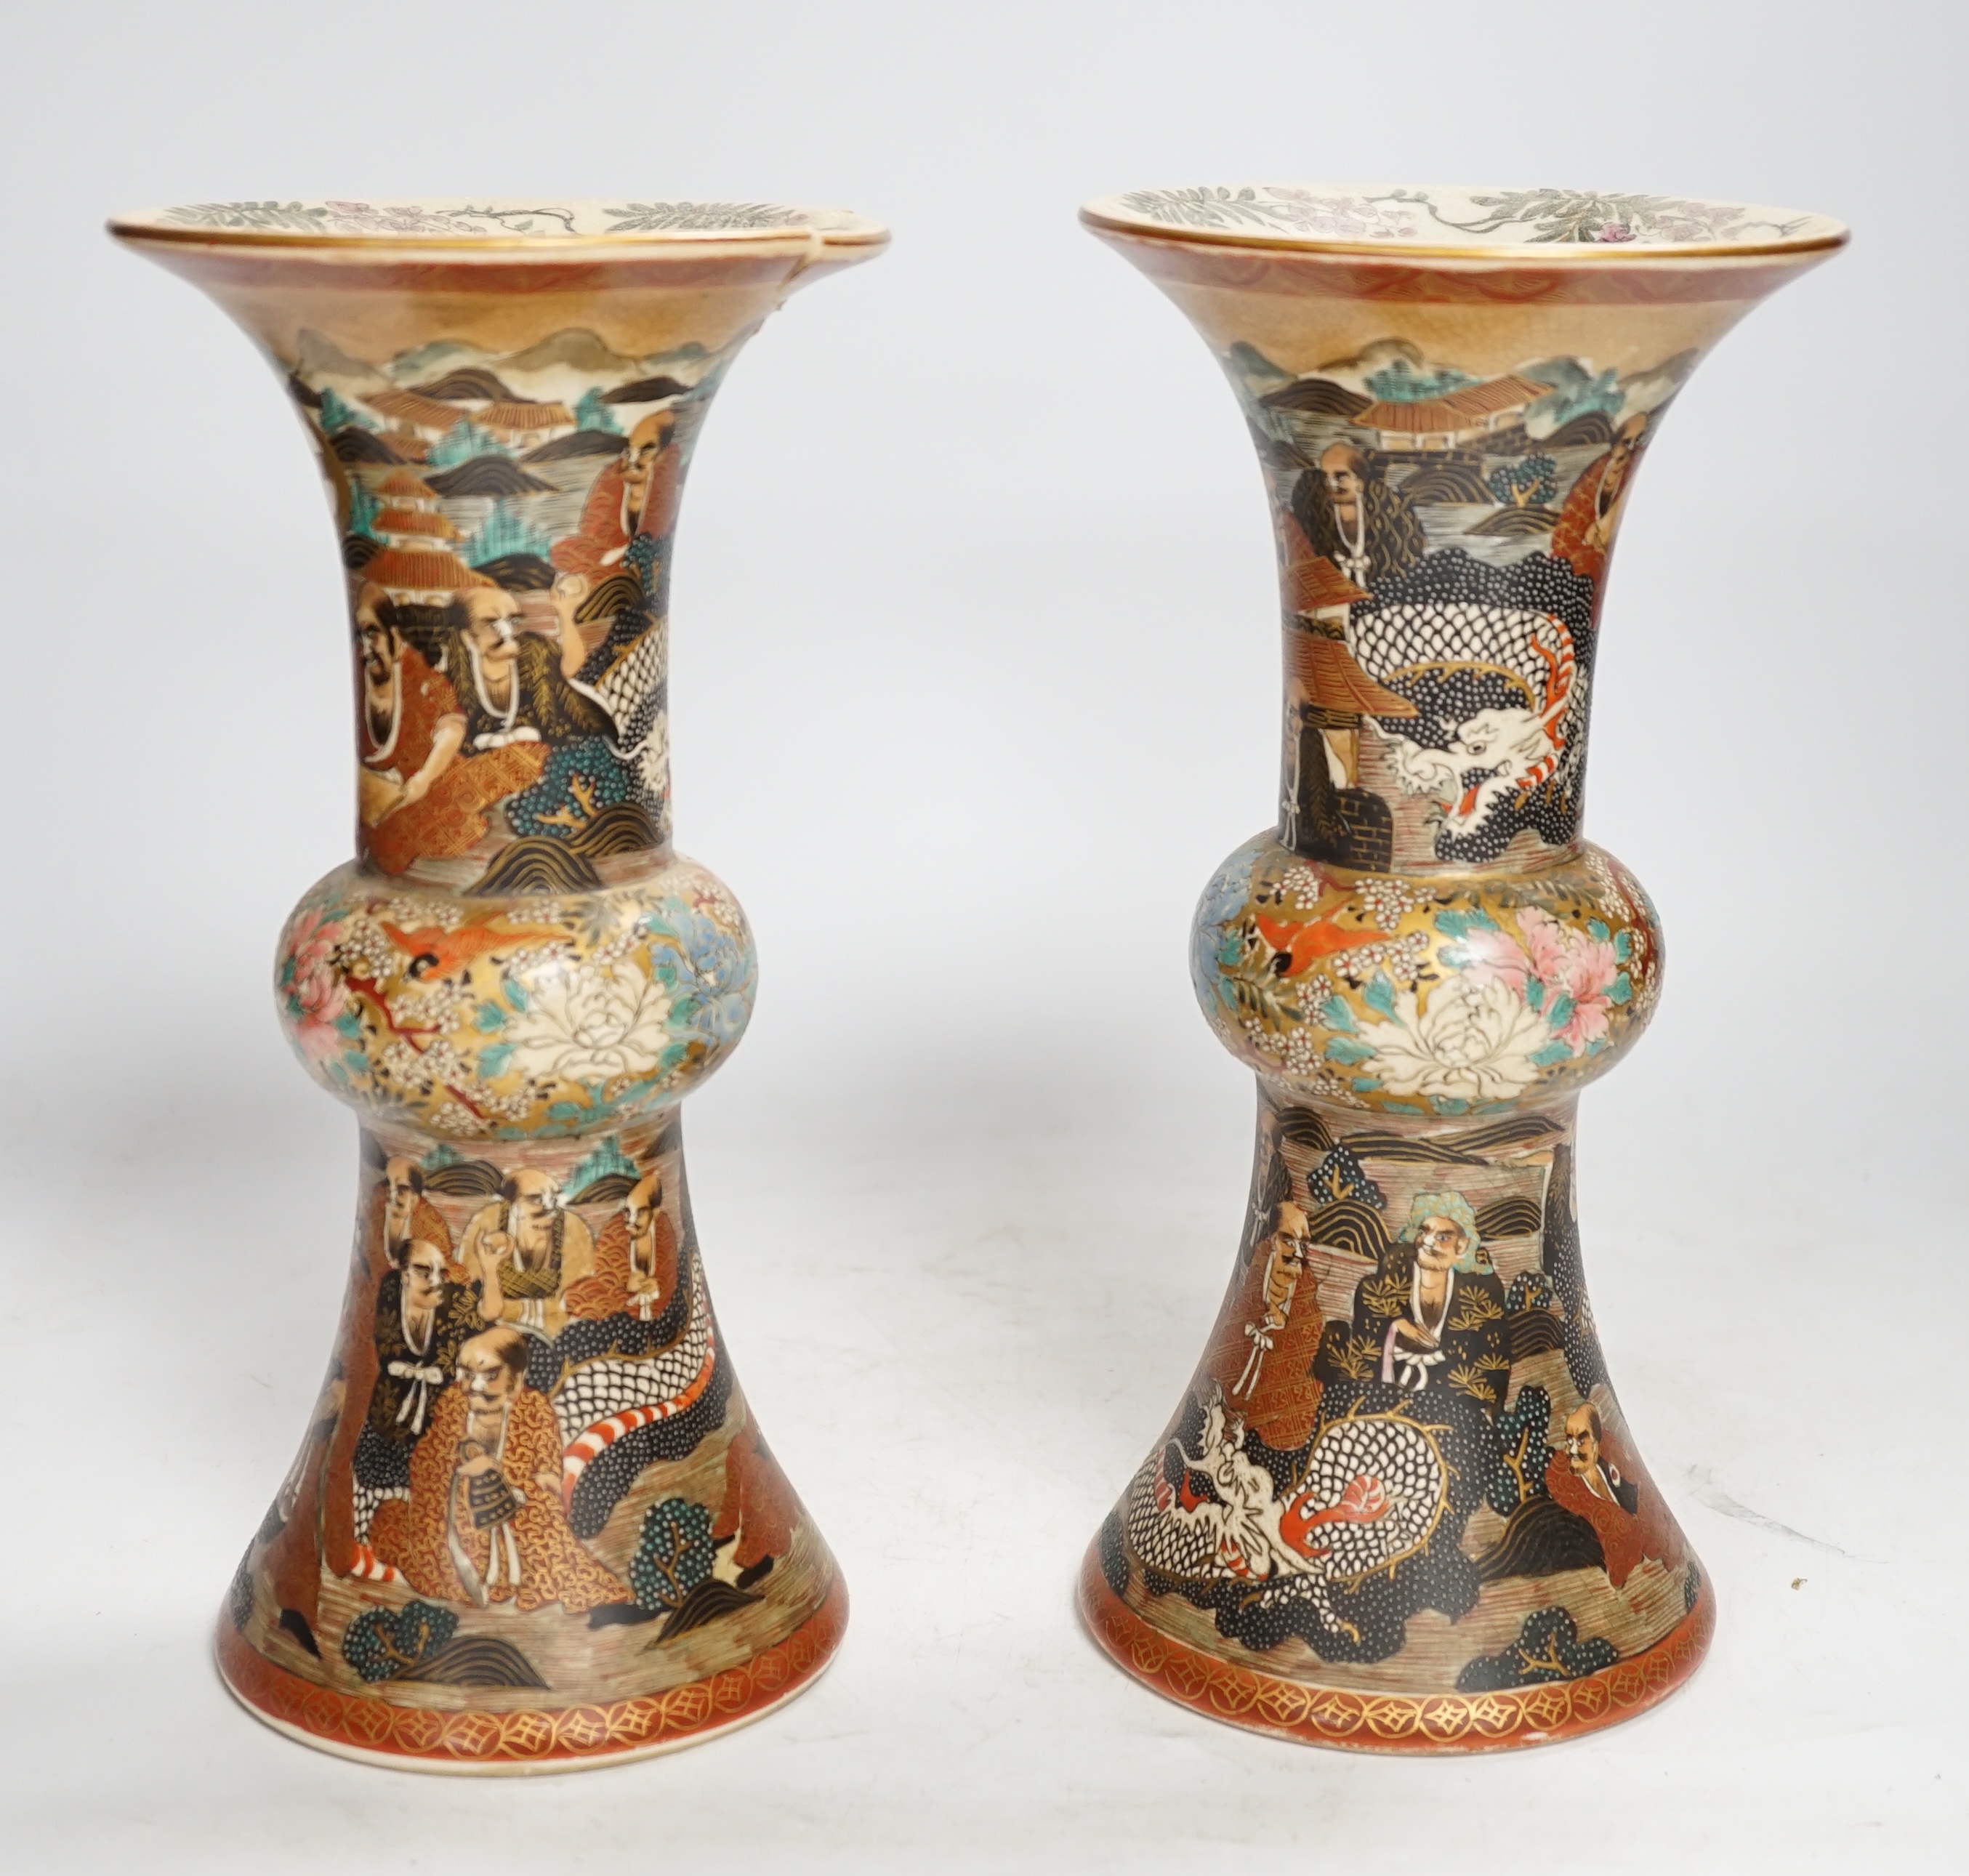 A pair of Japanese satsuma pottery 'rakan' vases, Meiji period, 24.5cm high (one a.f.). Condition - fair to good